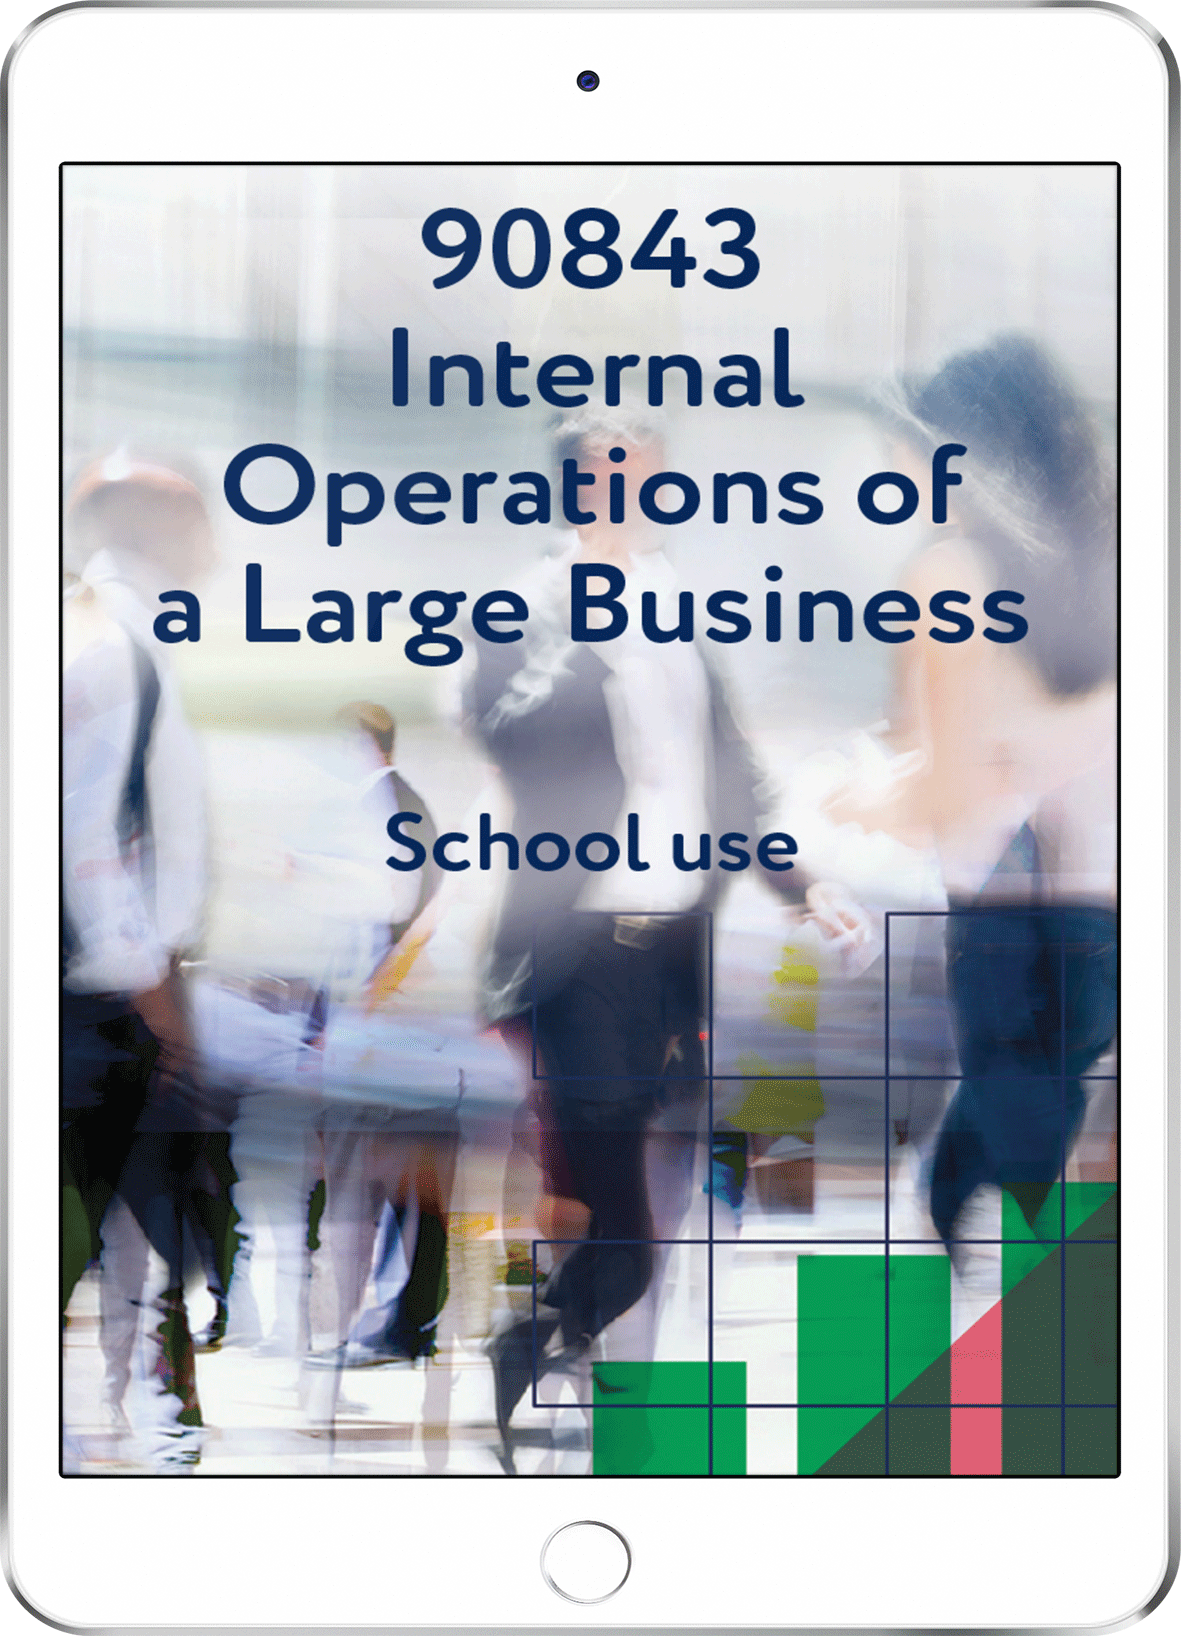 90843 Internal Operations of a Large Business - School Use